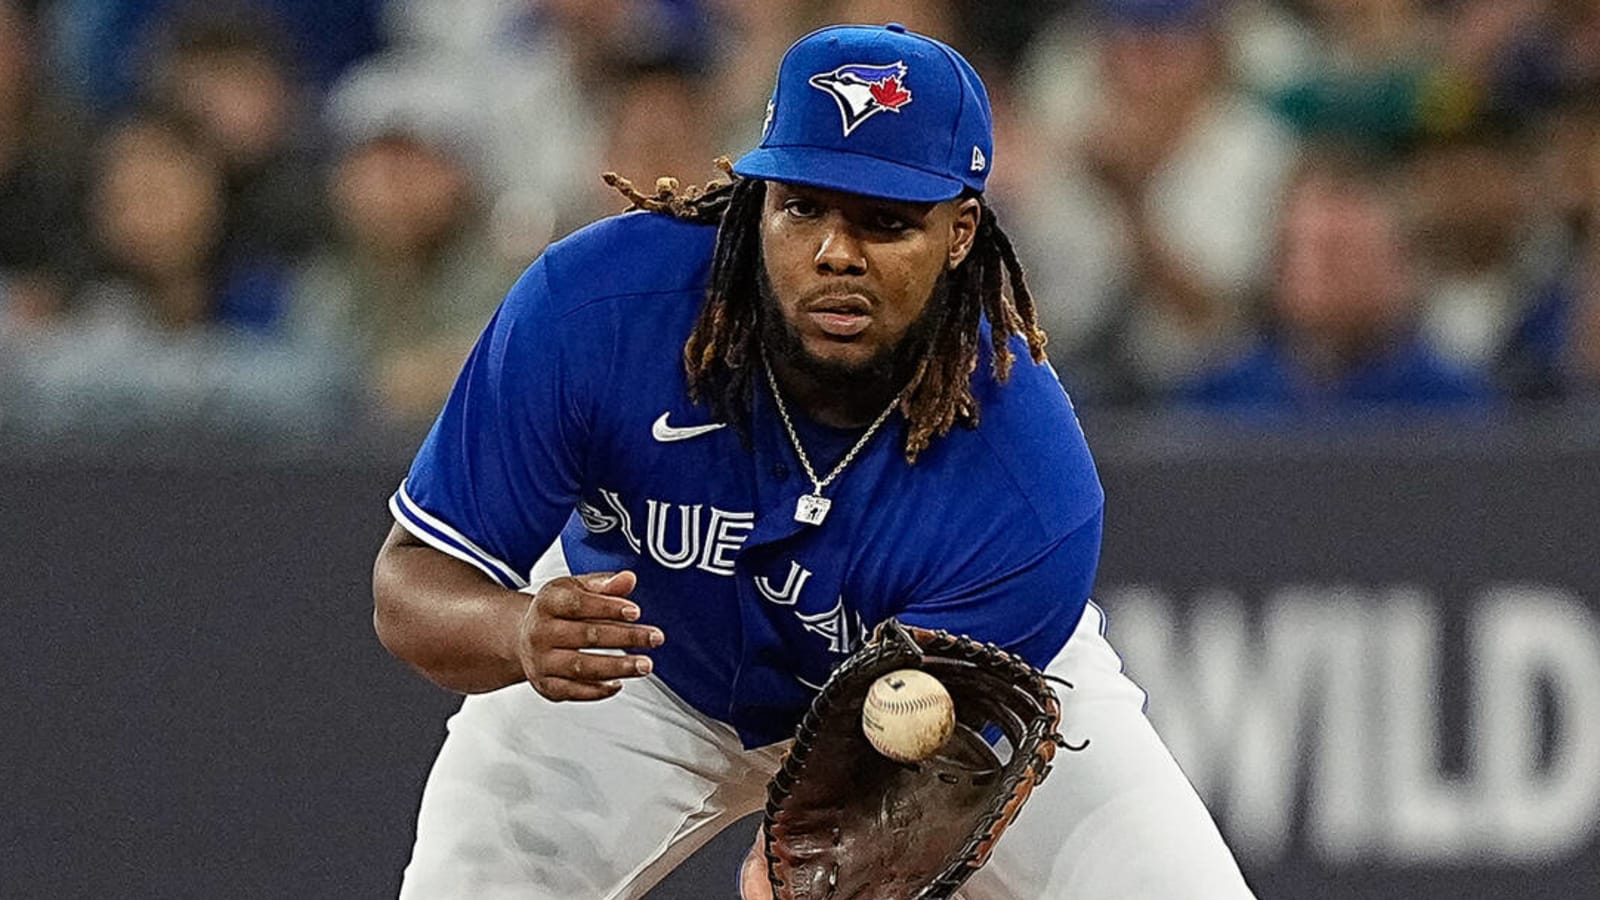 Guerrero Jr. Leading Jays Offense with Hot Start – Far North Sider